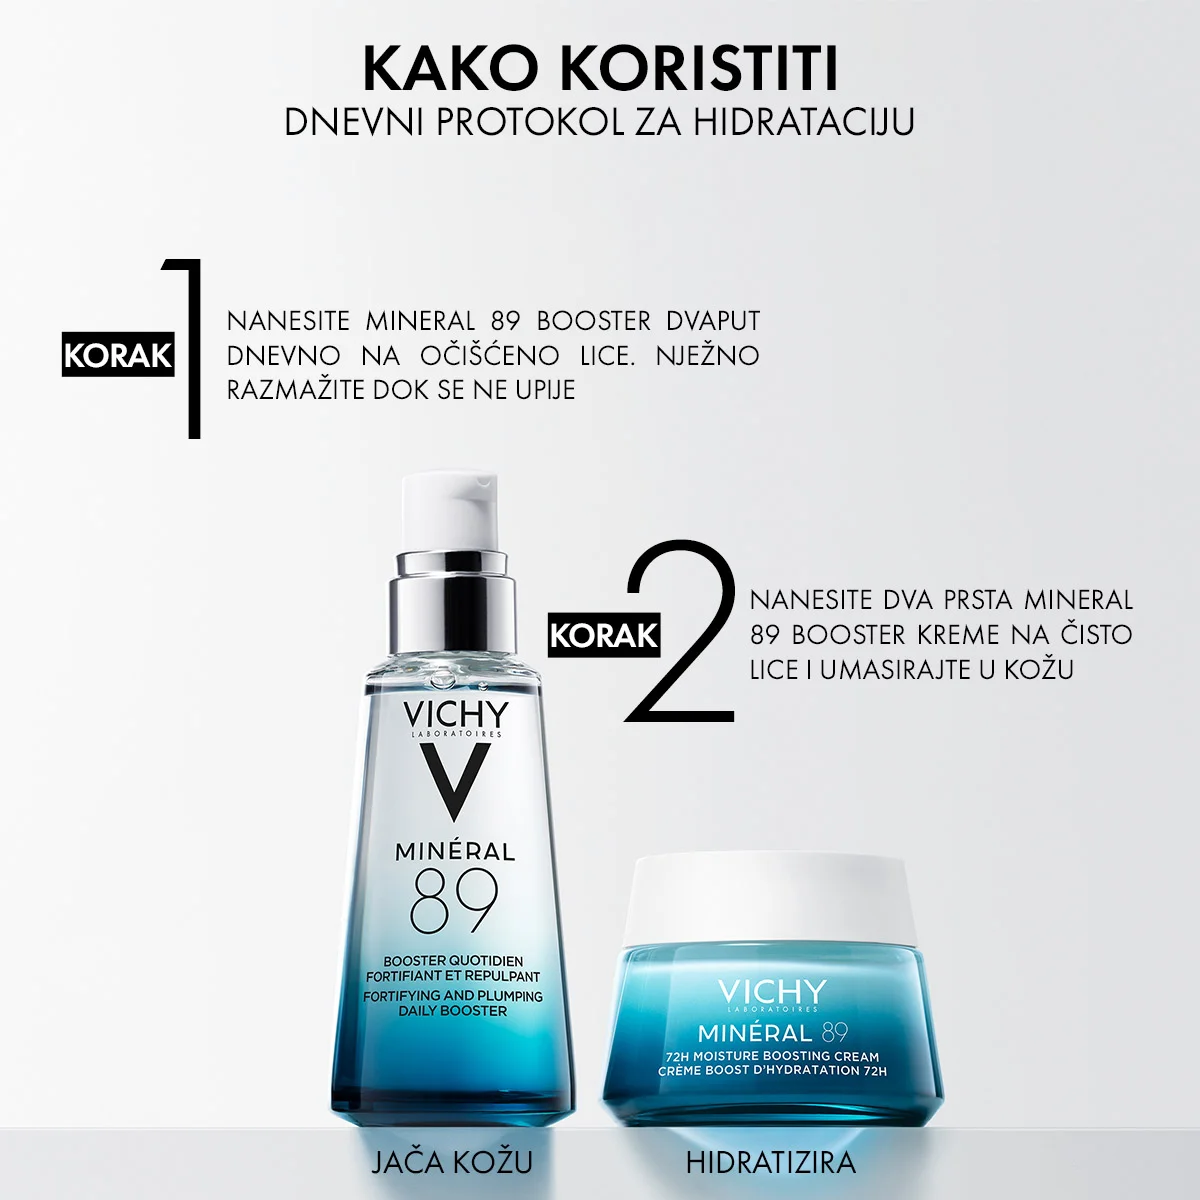 Vichy MINERAL 89 Protocol for intensive hydration and stronger skin for all skin types (4)